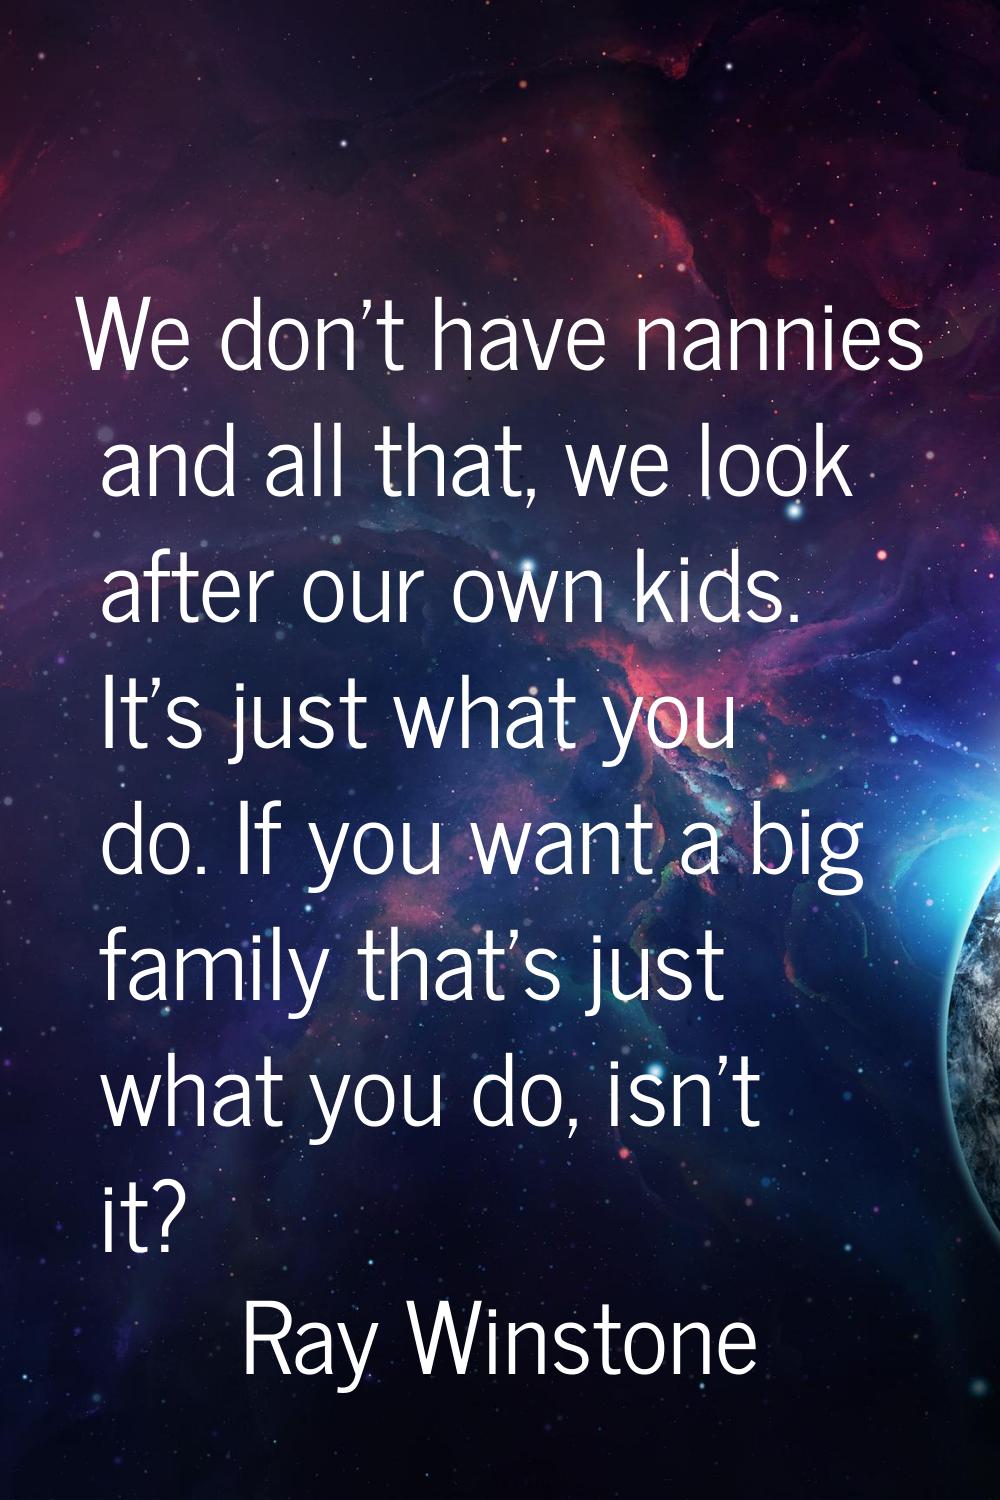 We don't have nannies and all that, we look after our own kids. It's just what you do. If you want 